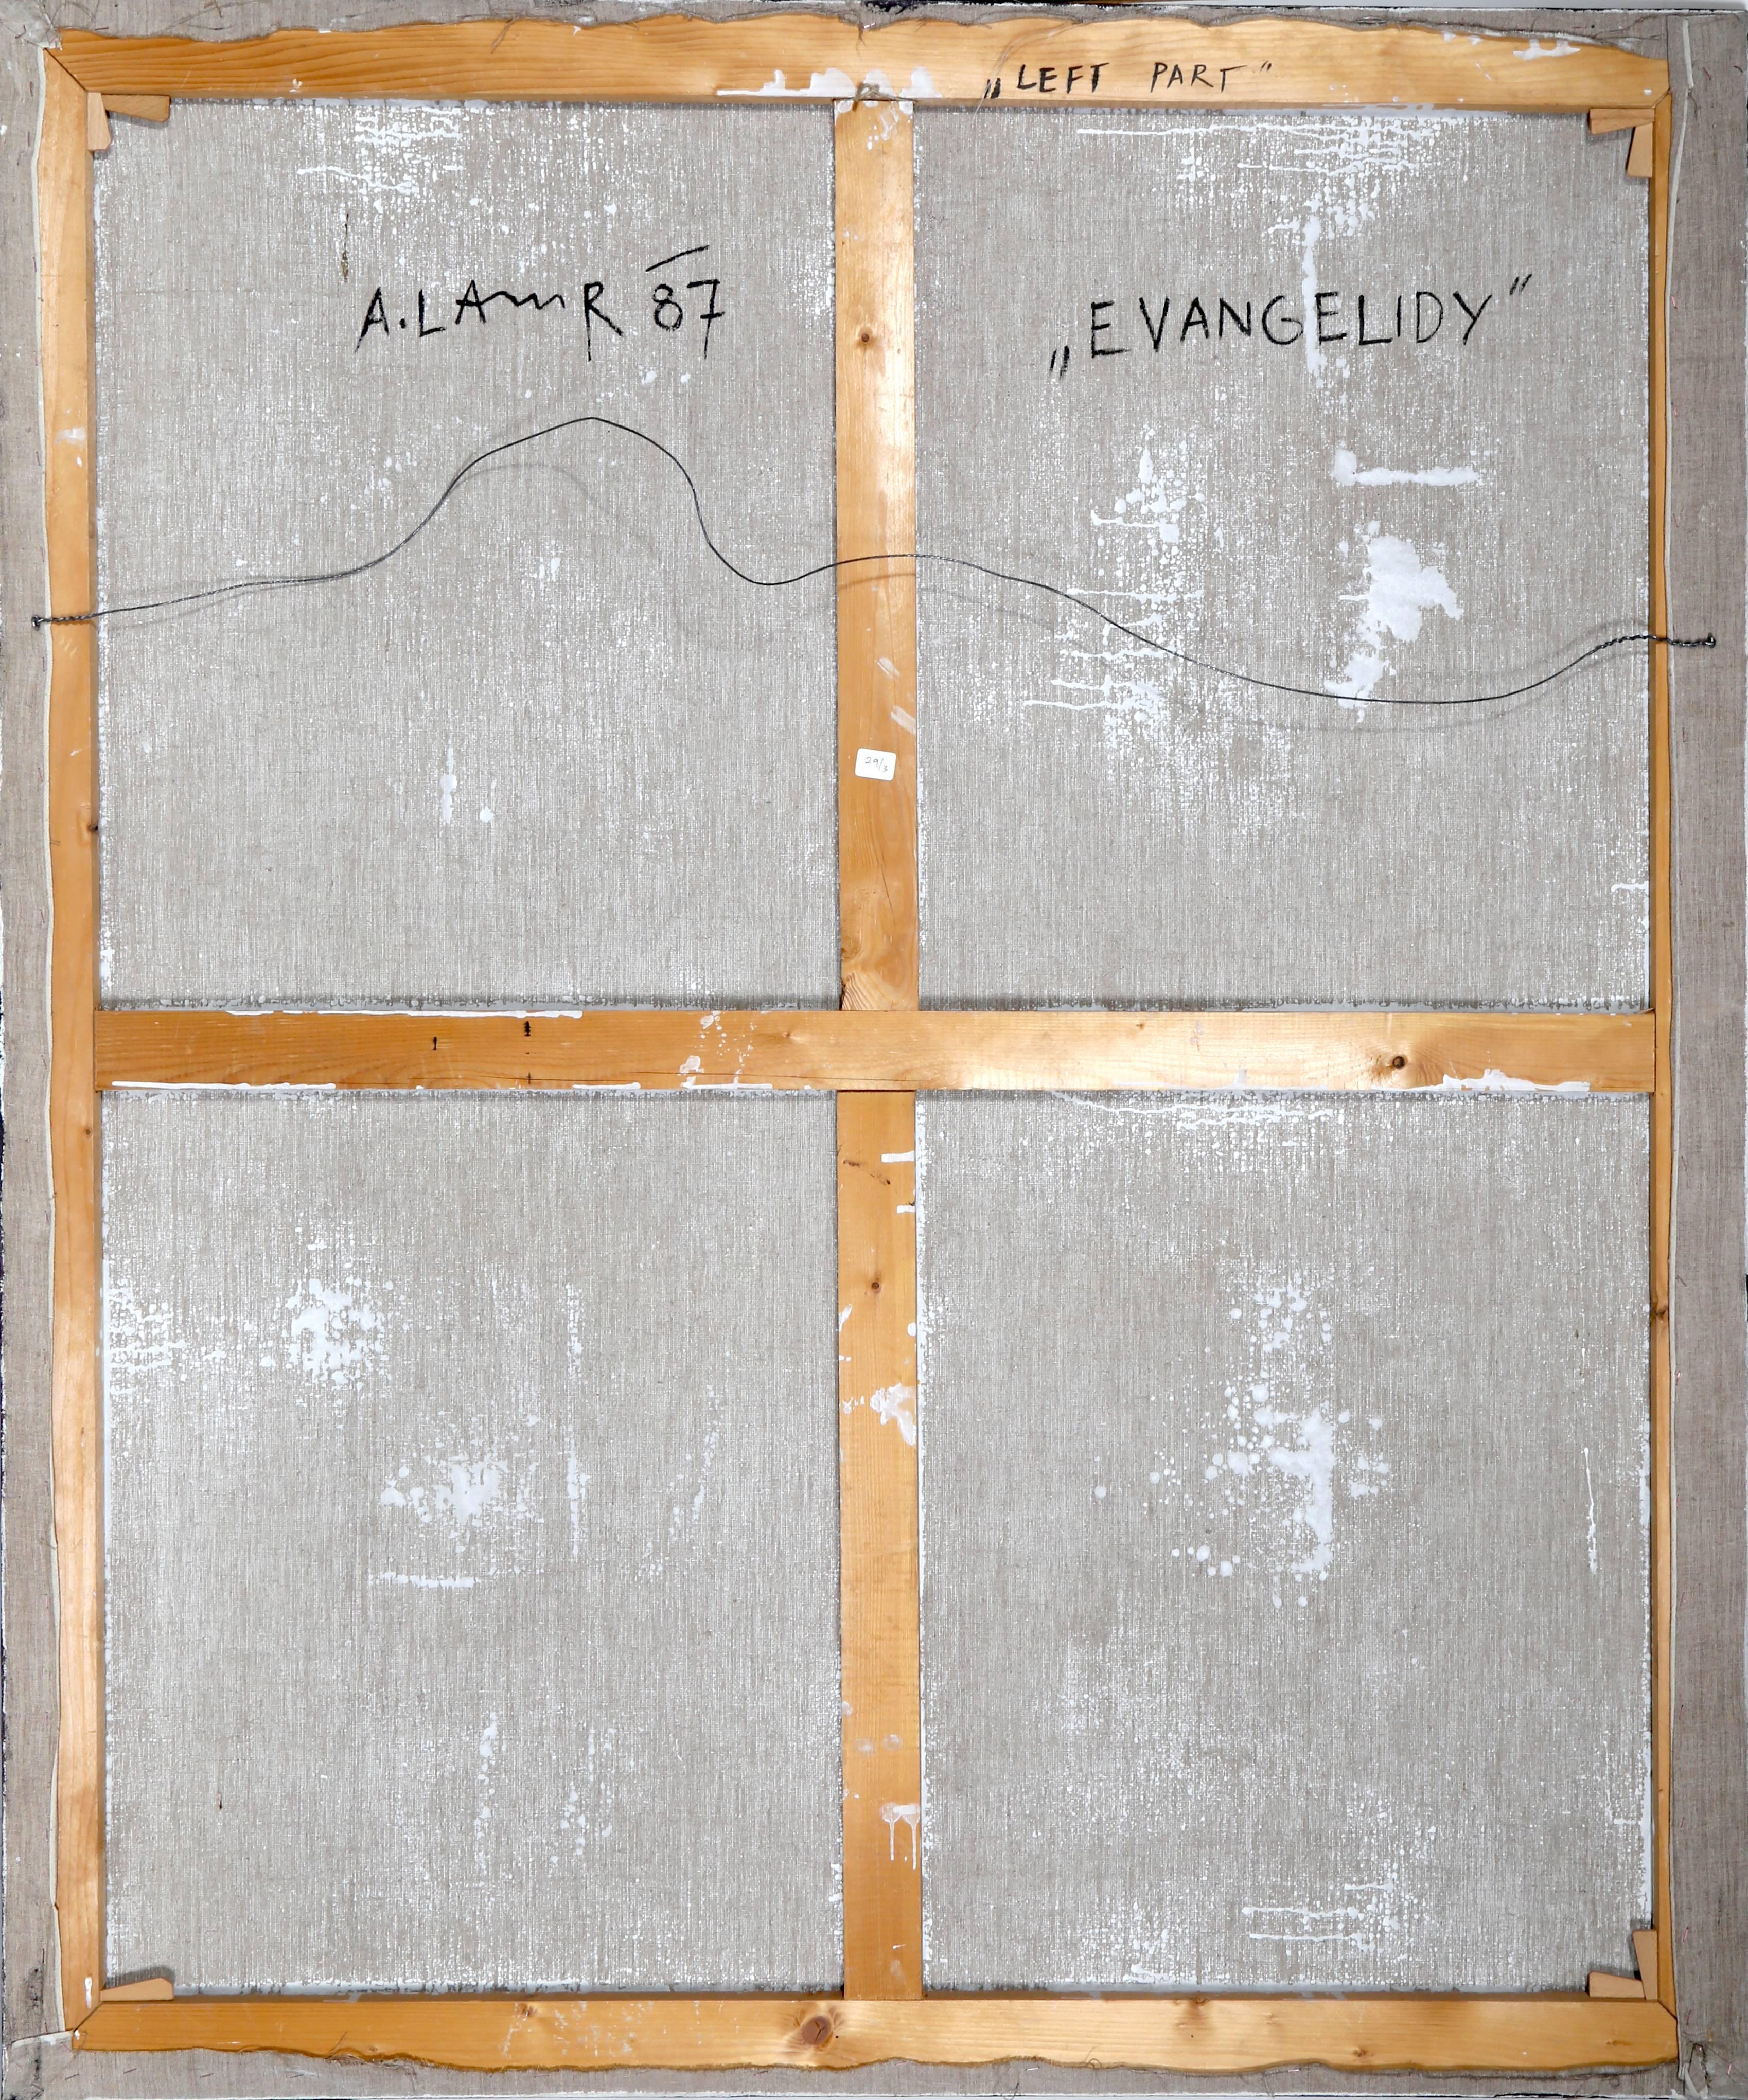 Evangelidy, Triptych of Three Large Paintings by Ales Lamr 6